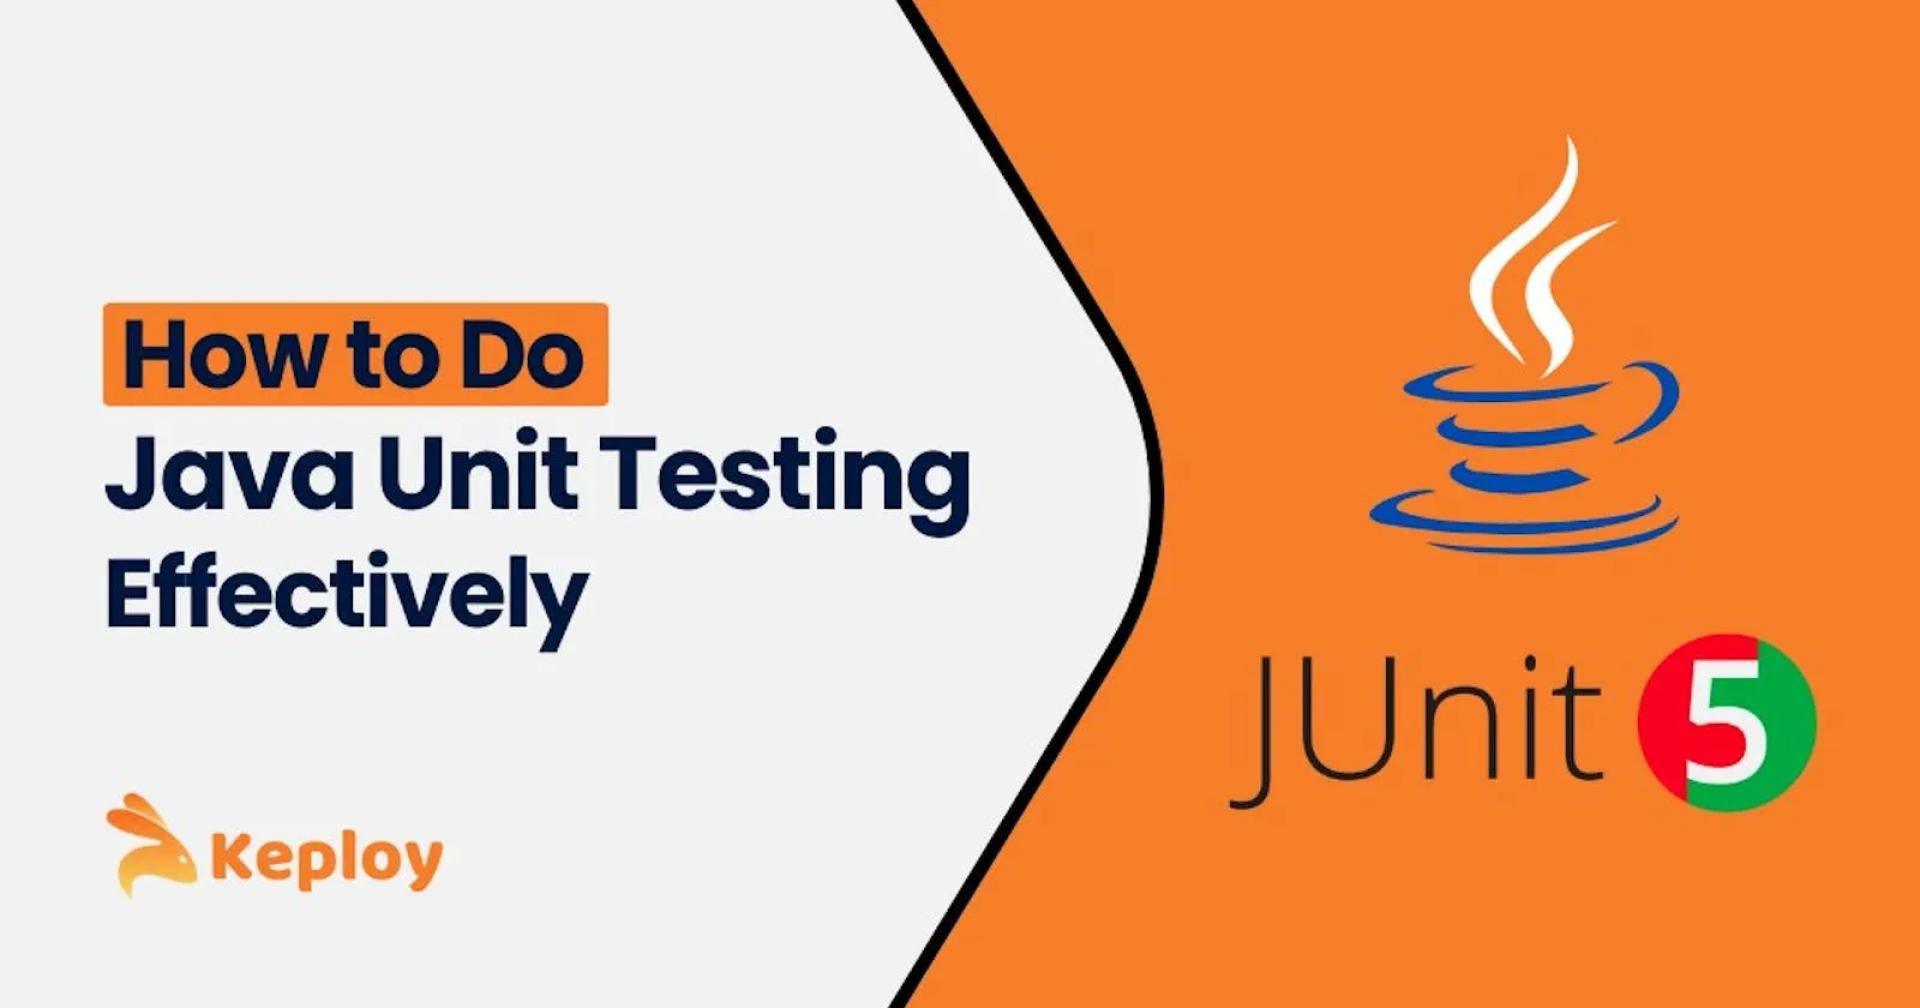 How to Do Java Unit Testing Effectively